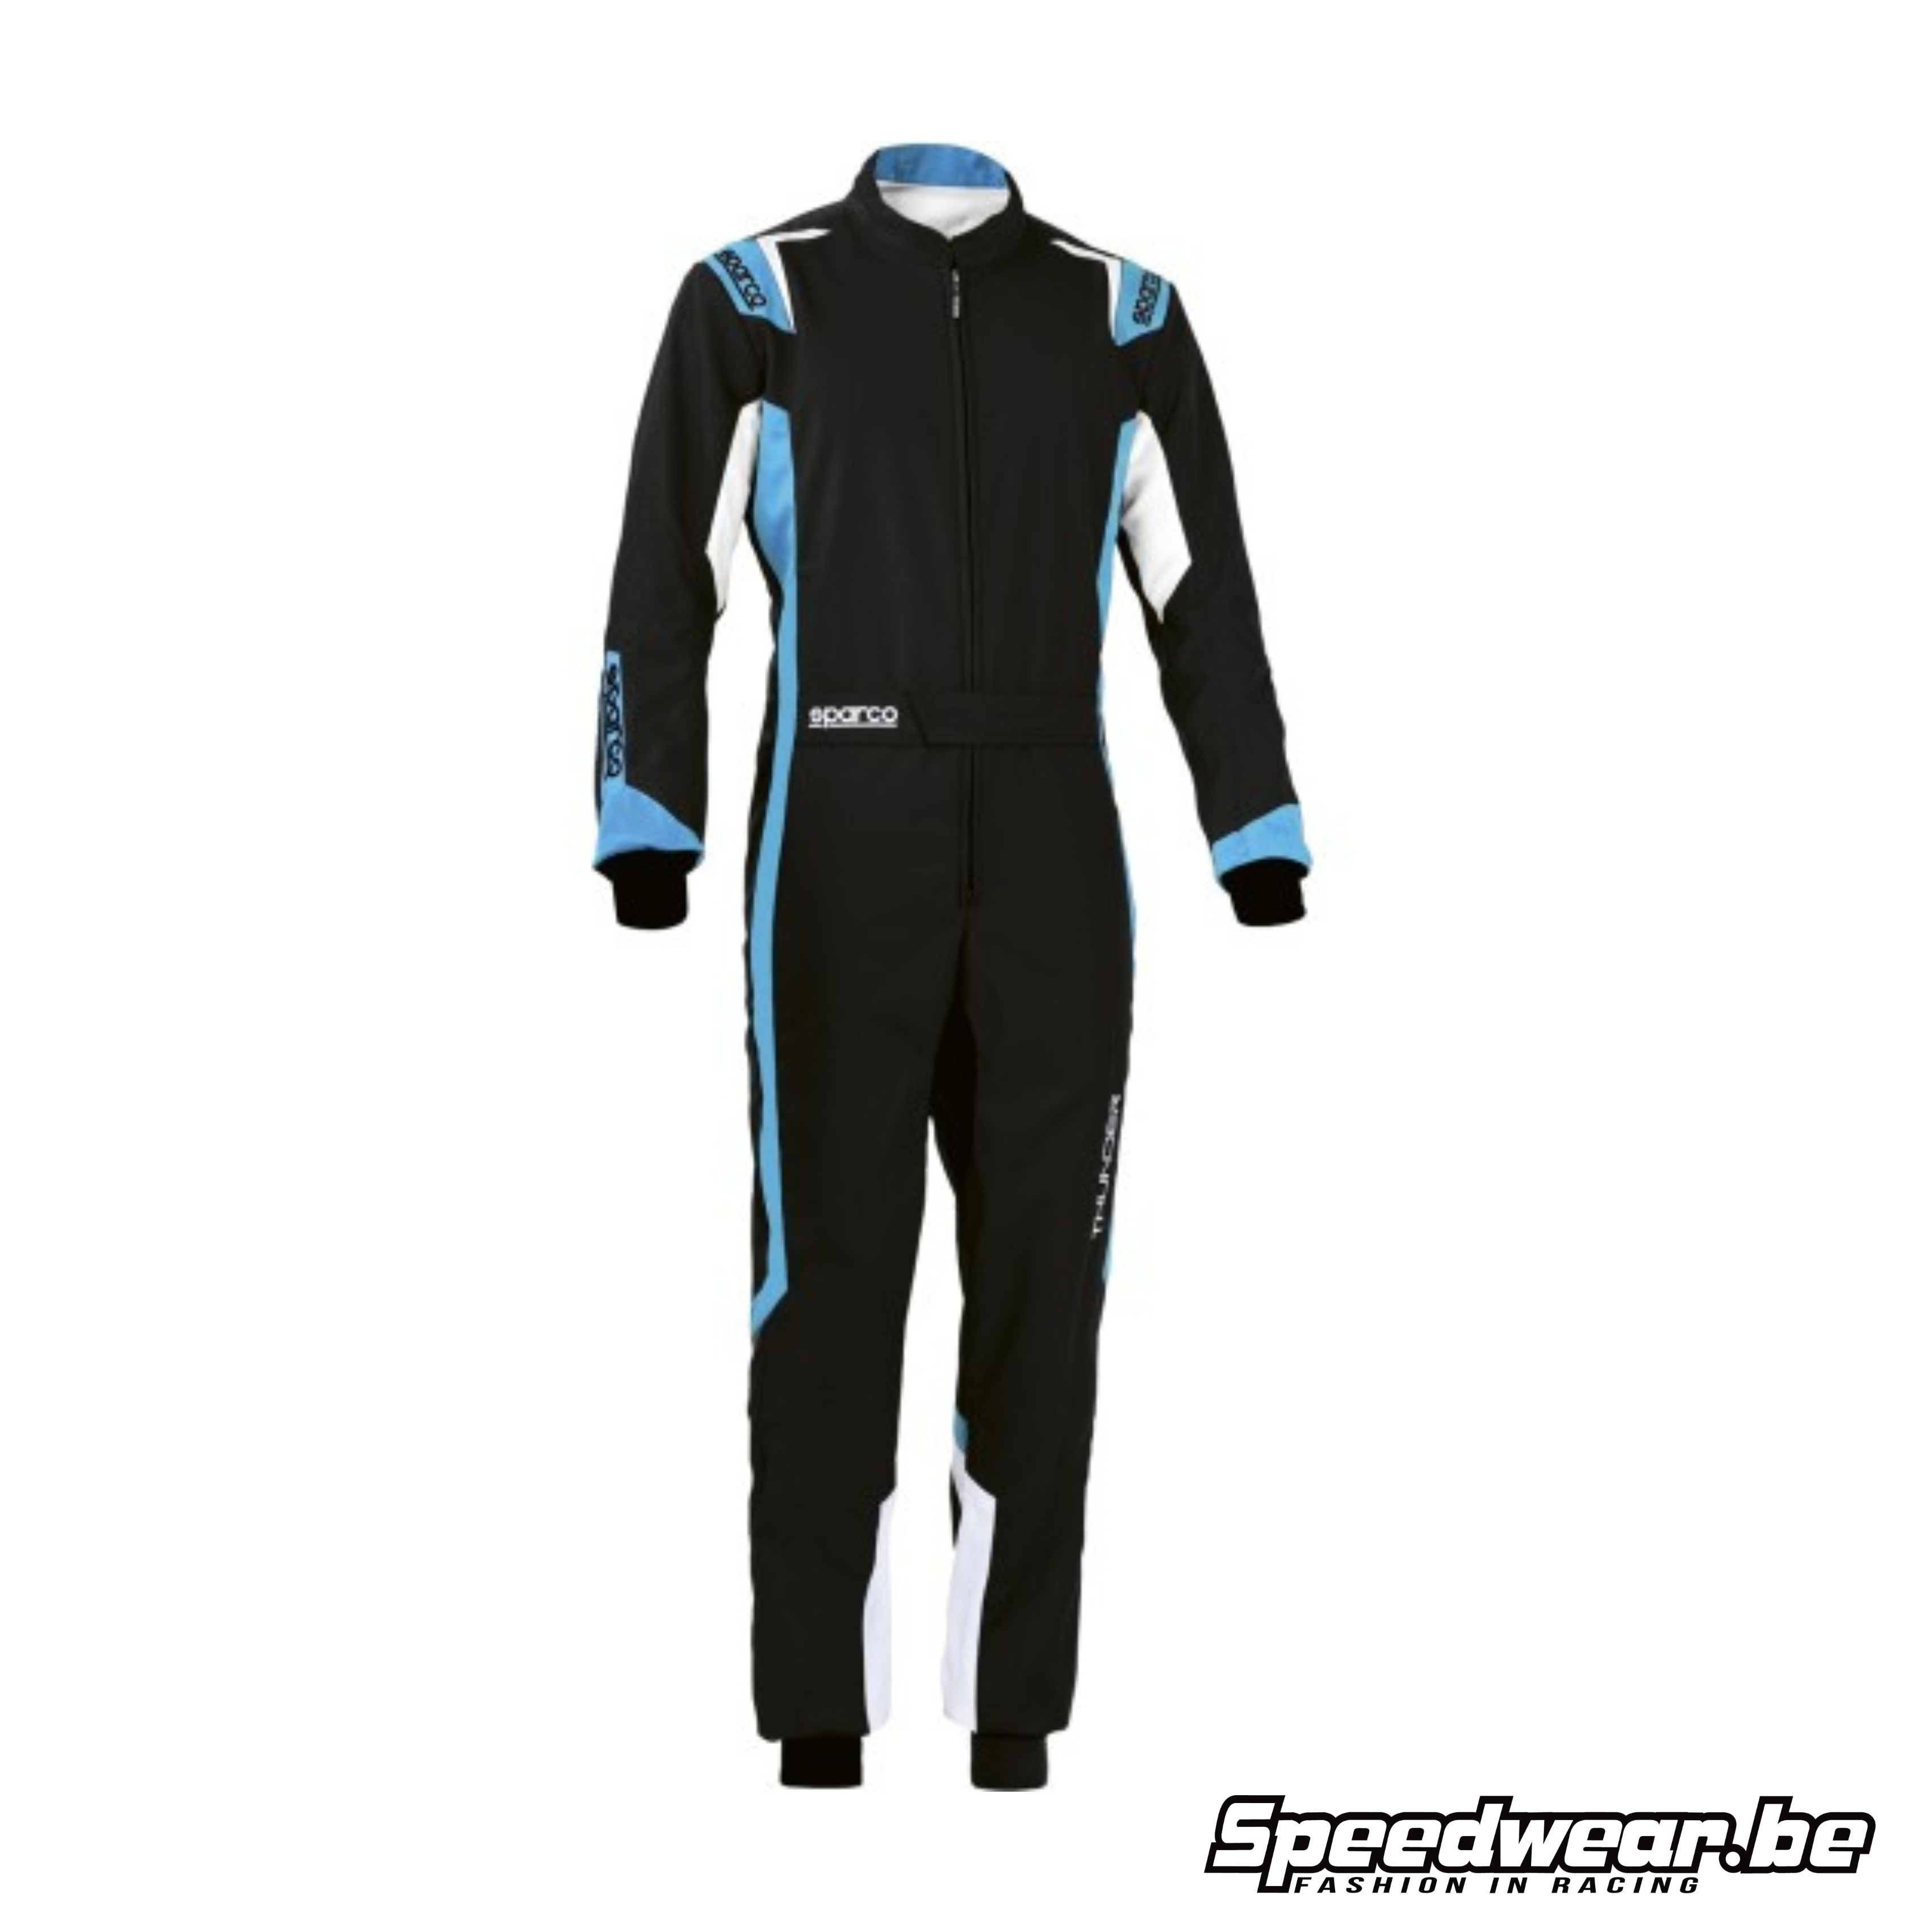 Sparco THUNDER raceoverall karting